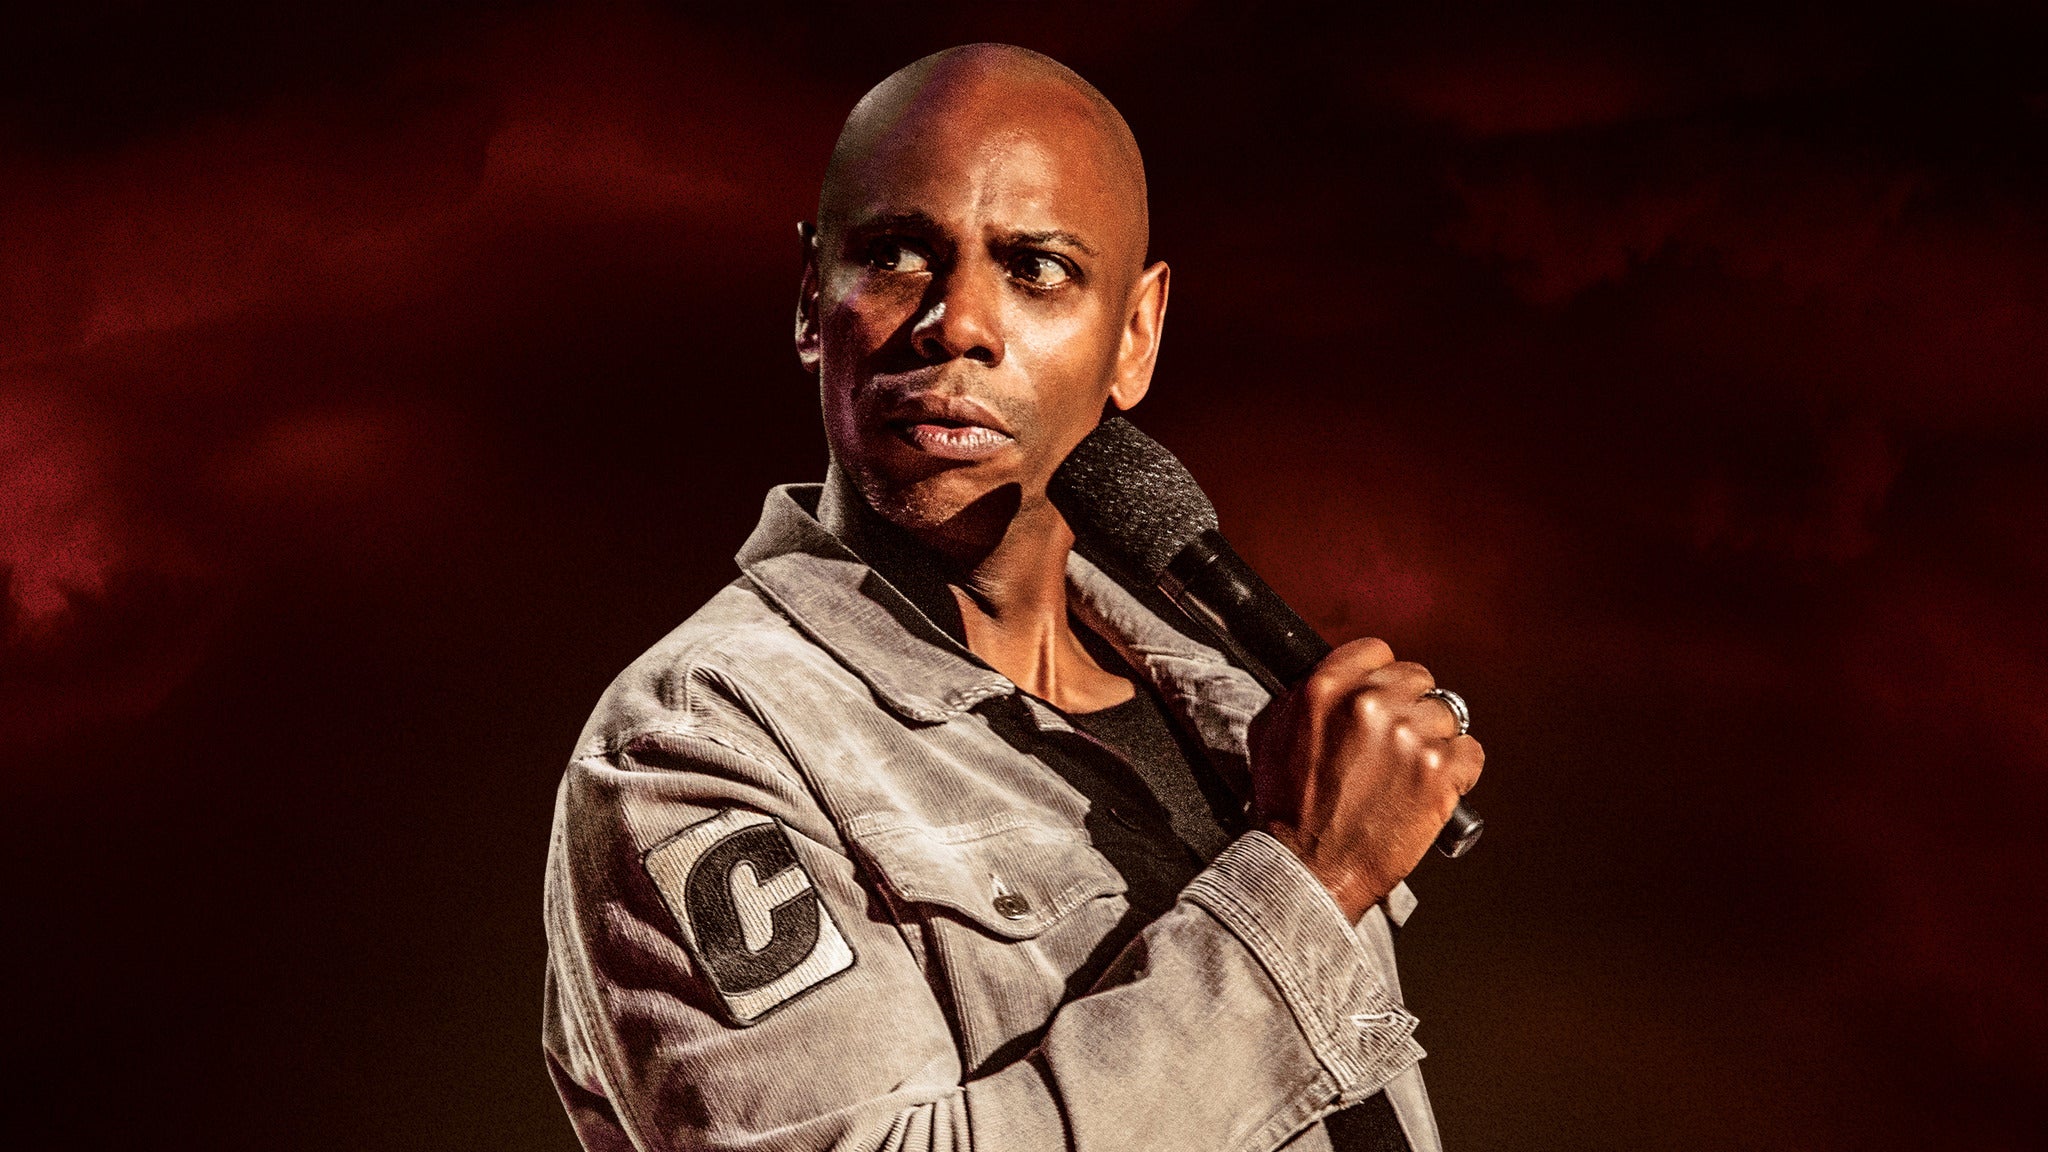 "Untitled" Dave Chappelle Documentary in Hollywood promo photo for Official Platinum Onsale presale offer code